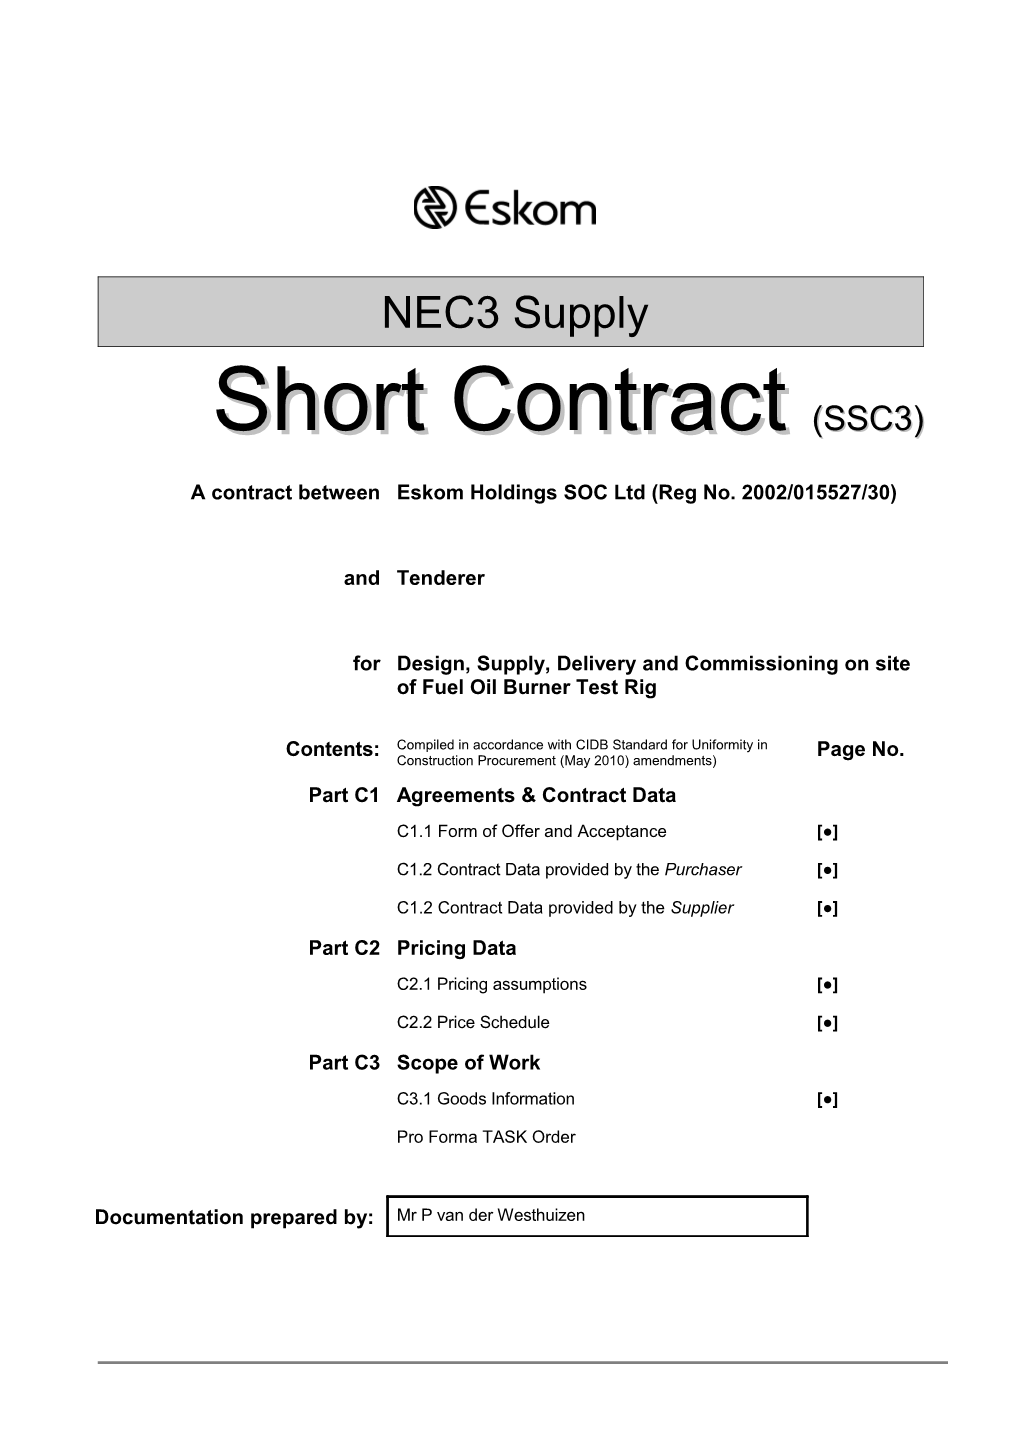 Short Supply Contract All Parts